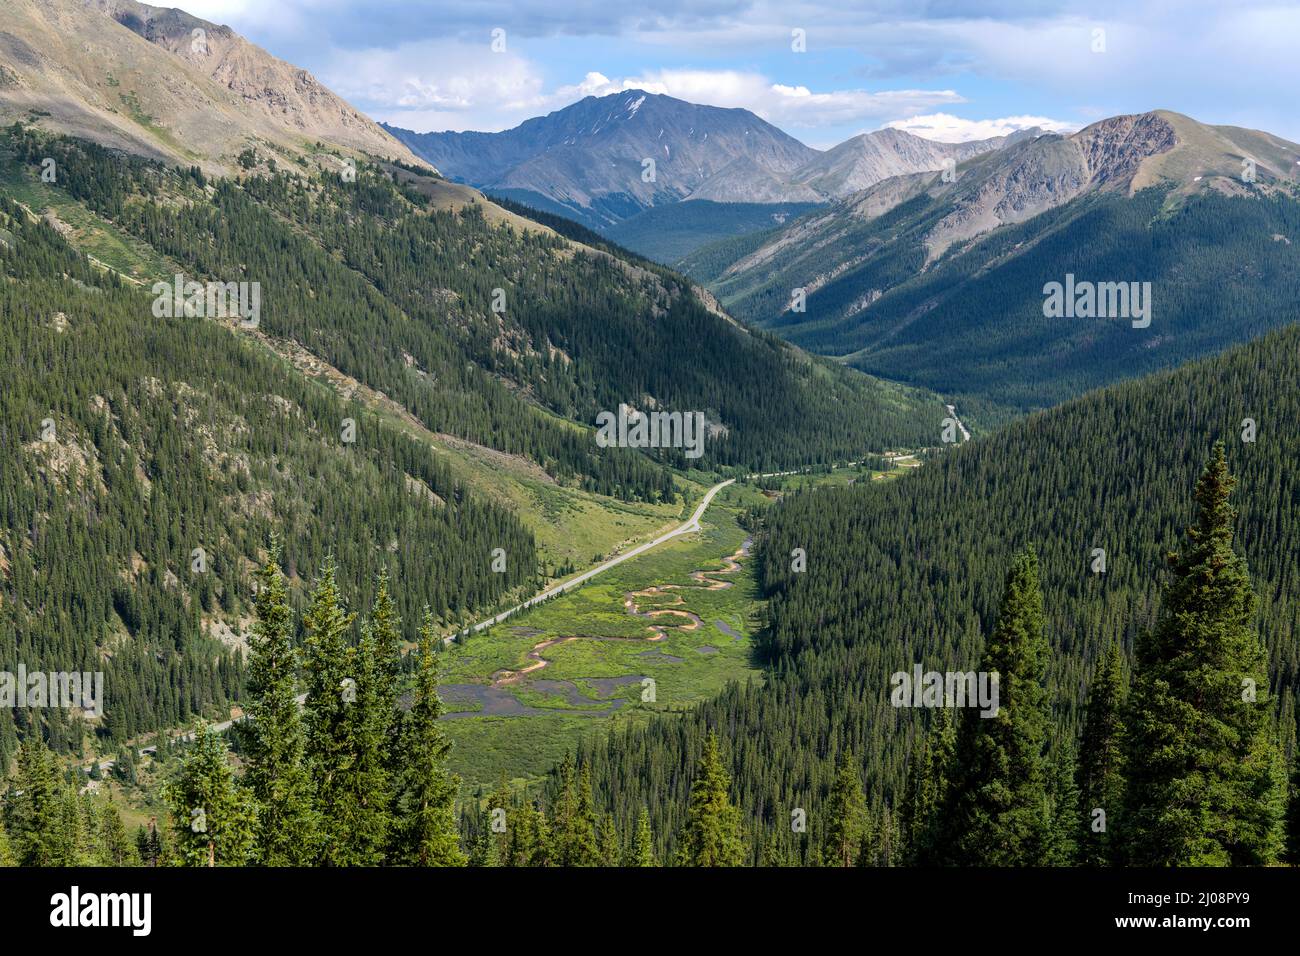 La Plata Peak - Summer view of Highway 82 winding in Lake Creek Valley at base of La Plata Peak, seen from the summit of Independence Pass, CO, USA. Stock Photo